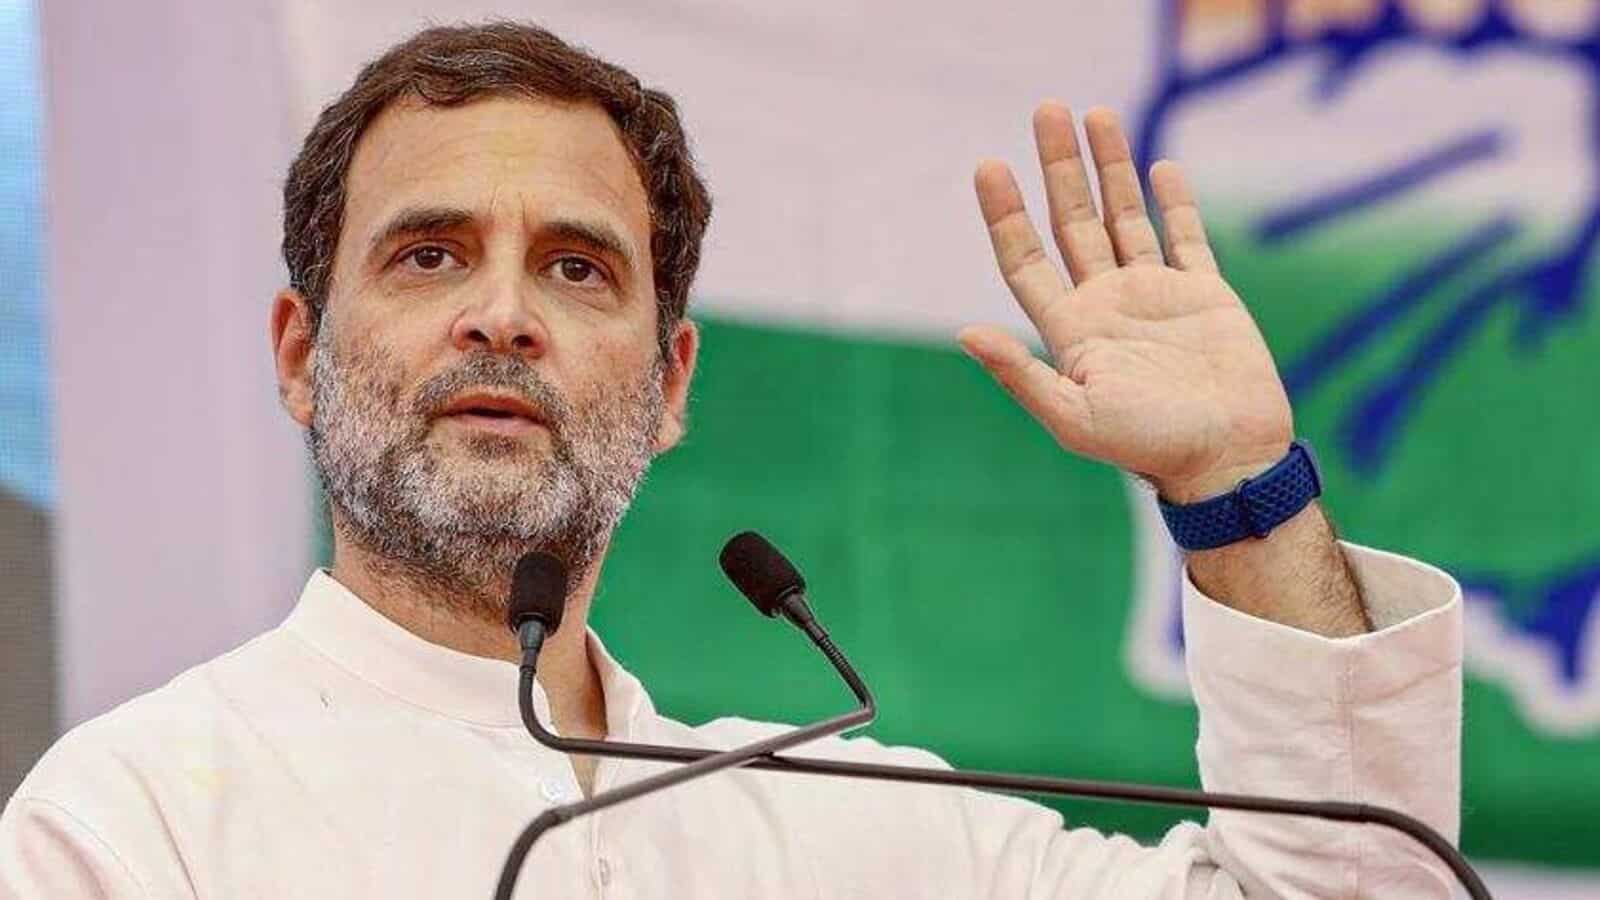 ‘BJP spent crores to ruin my image’: Rahul Gandhi accuses ruling party